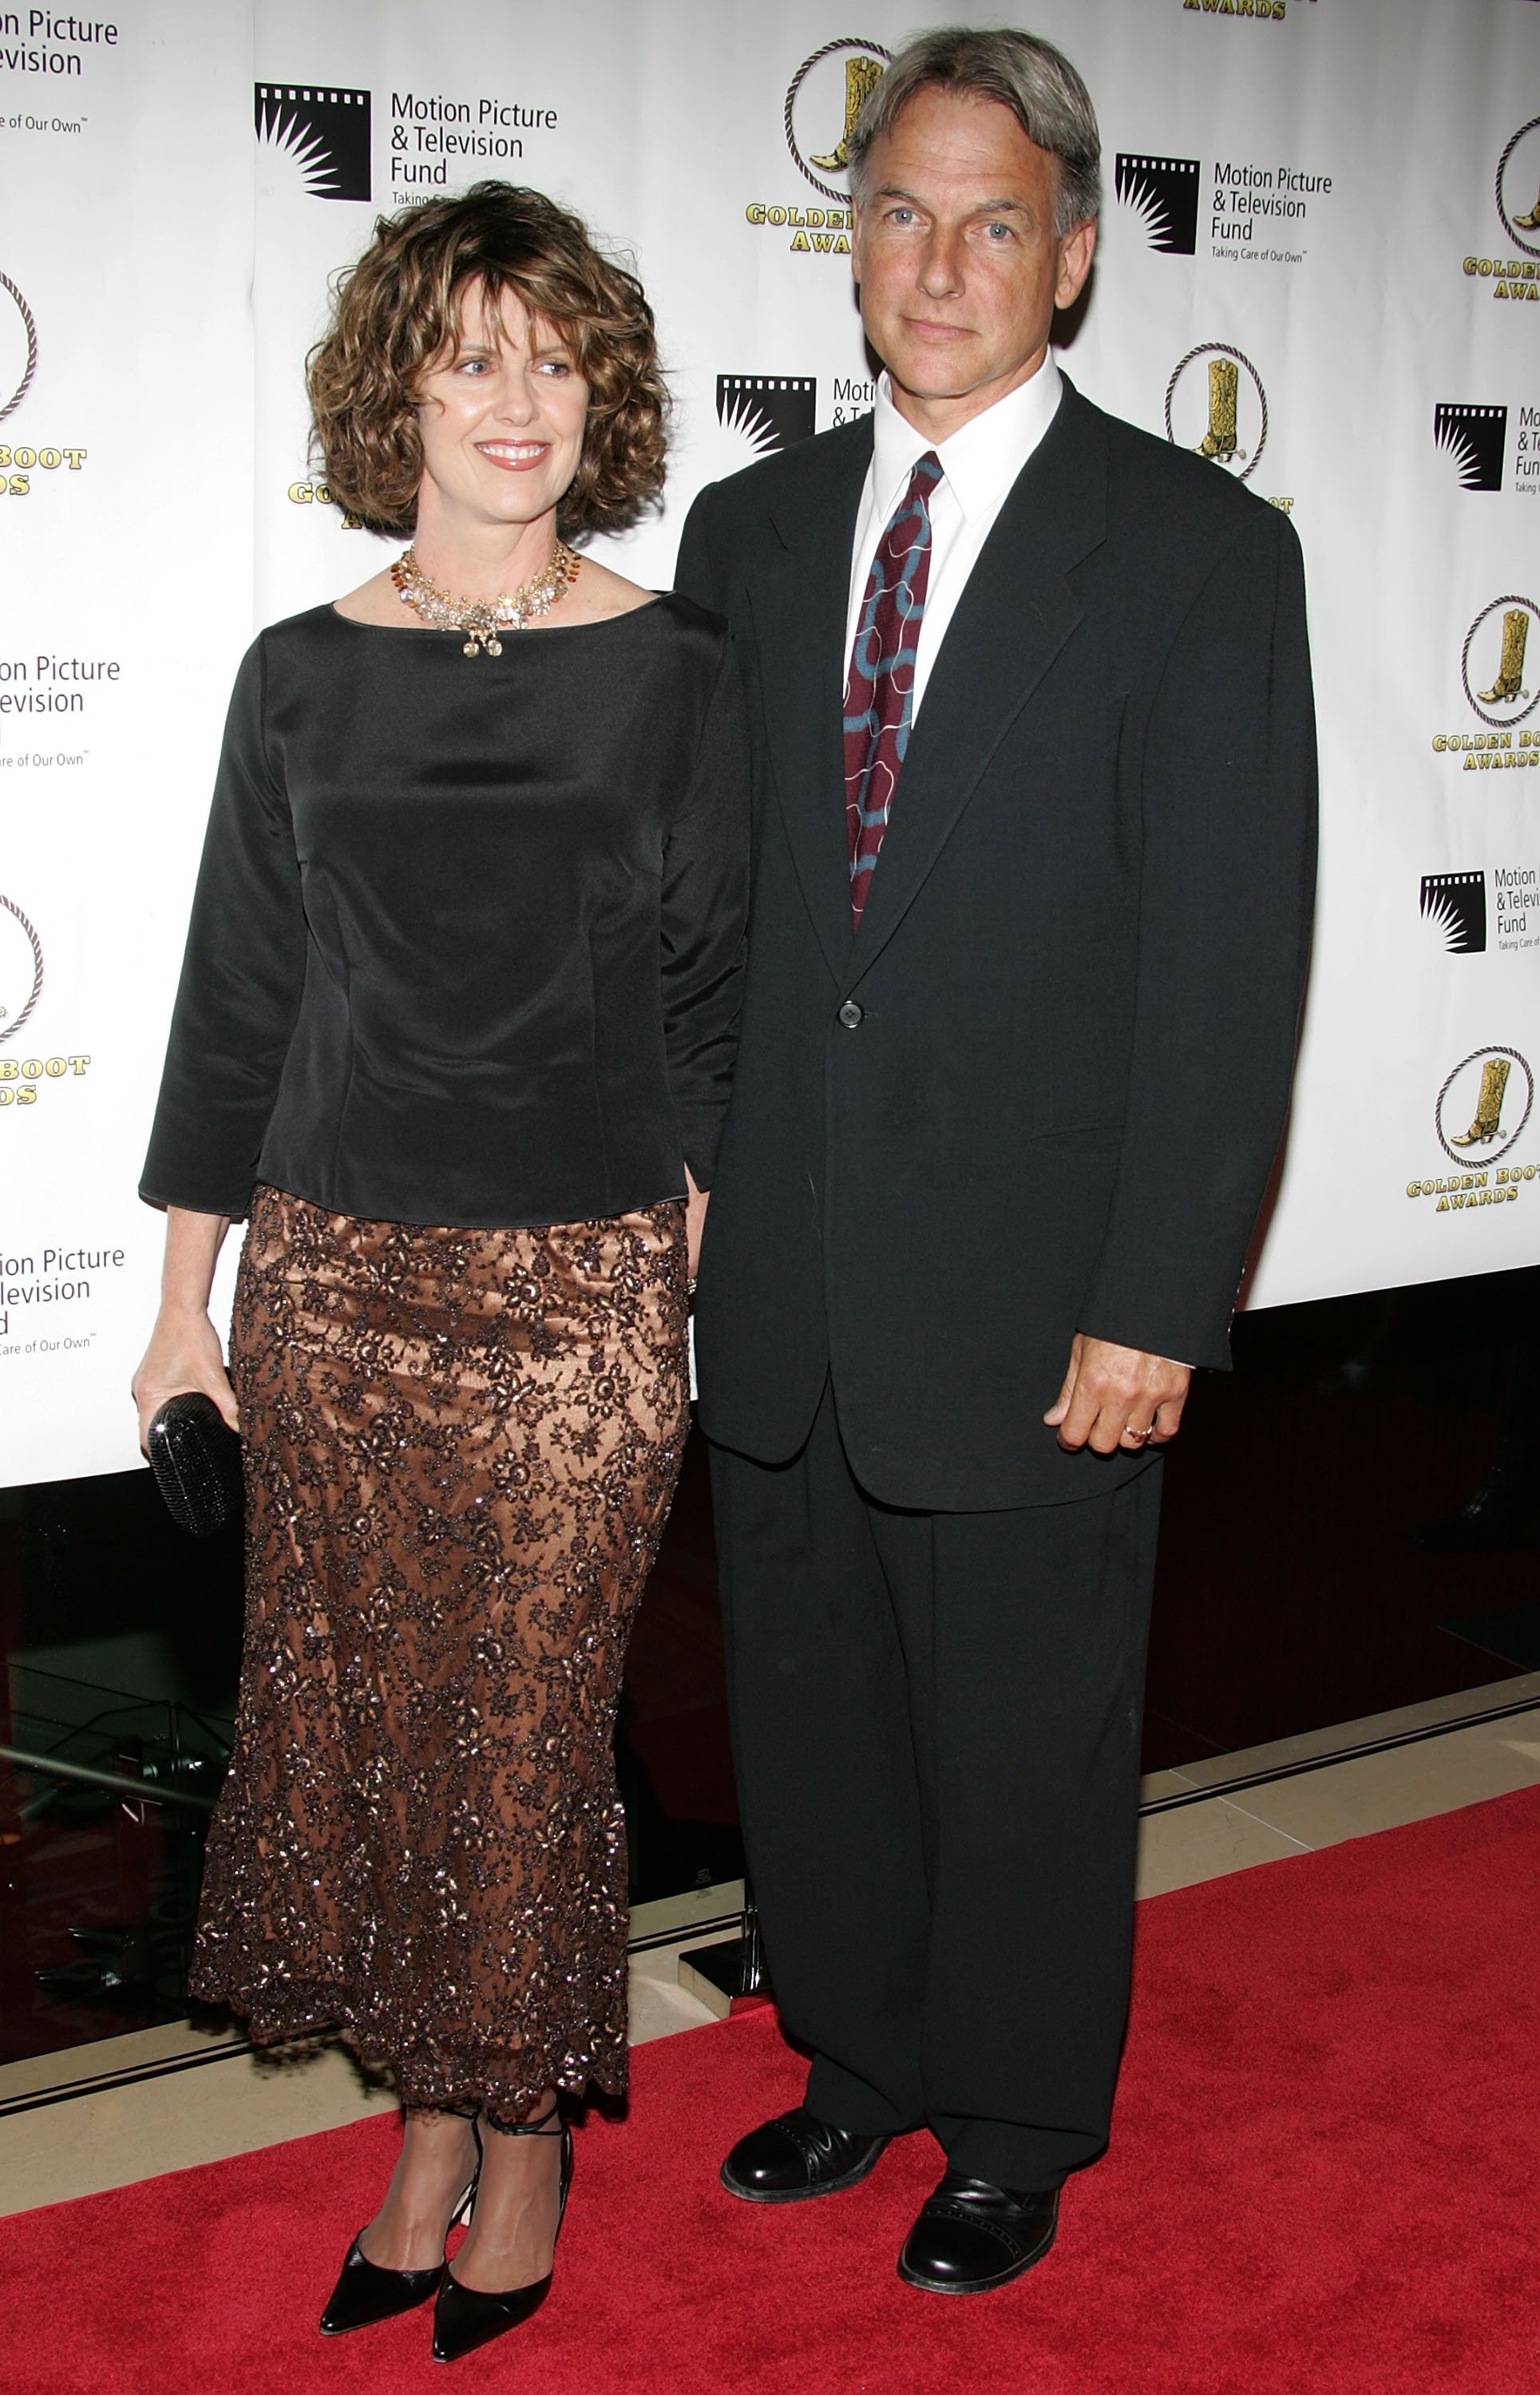 Mark Harmon and Pam Dawber attend the Golden Boot Awards held at the Beverly Hilton Hotel on August 13, 2005, in Beverly Hills, California. | Source: Getty Images